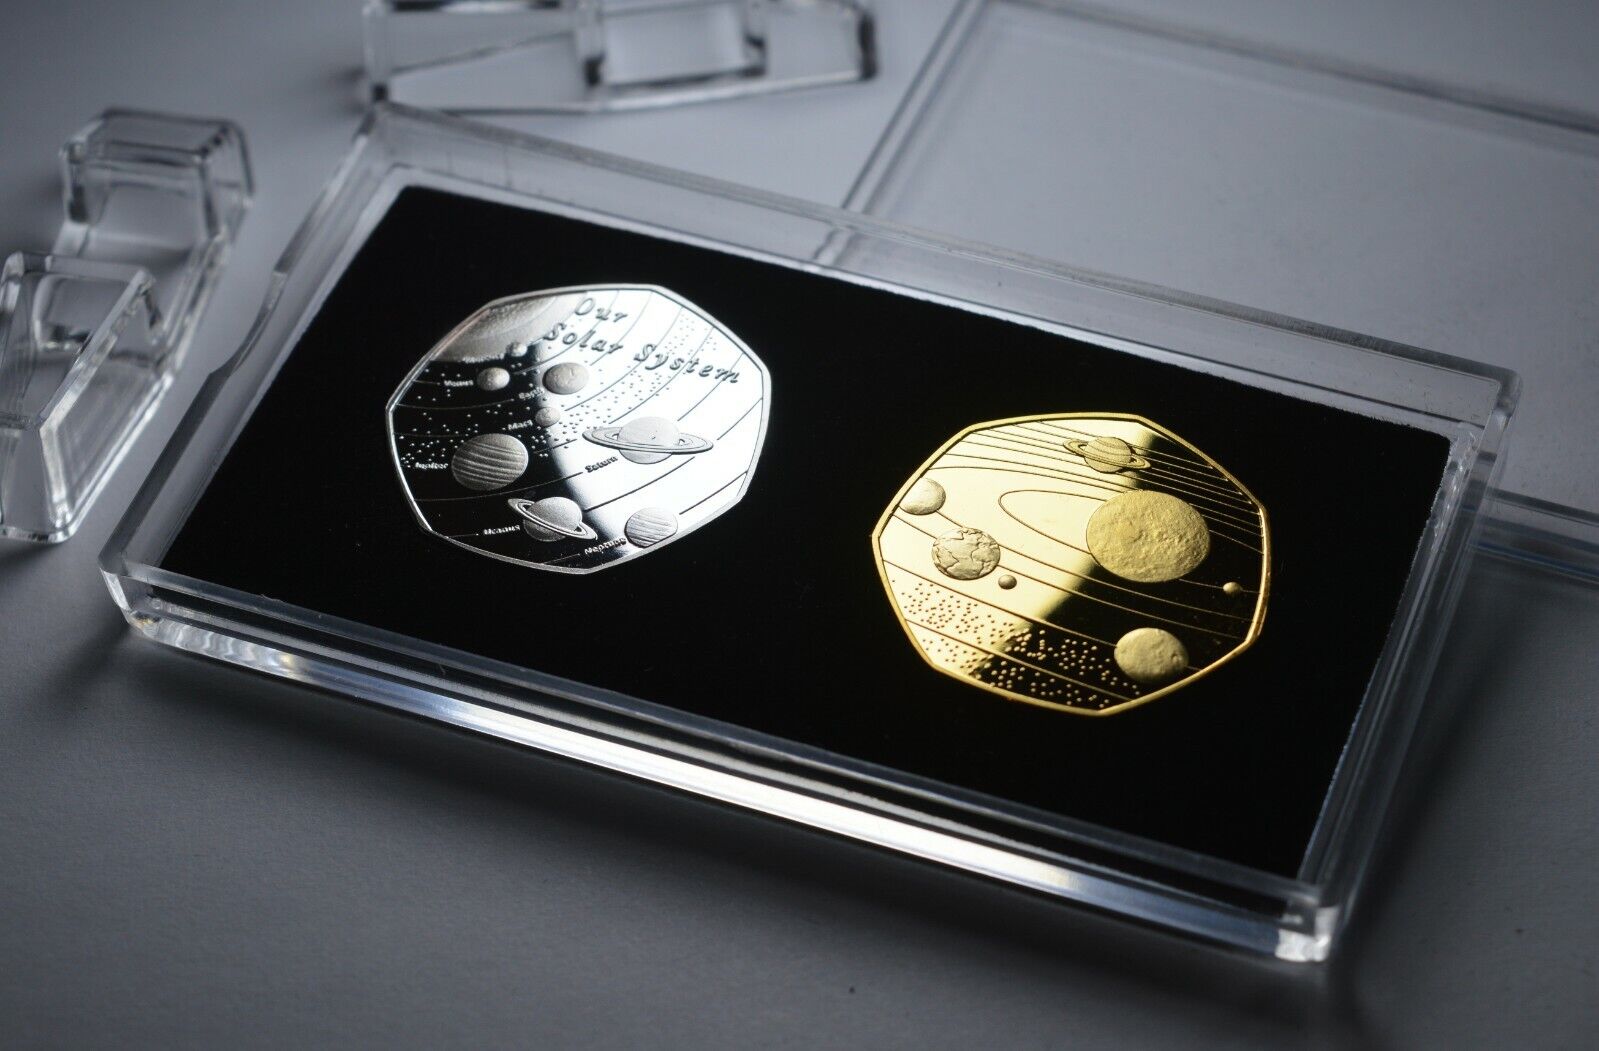 2 x OUR SOLAR SYSTEM Commemoratives in 50p Coin Display Case. Silver, 24ct Gold